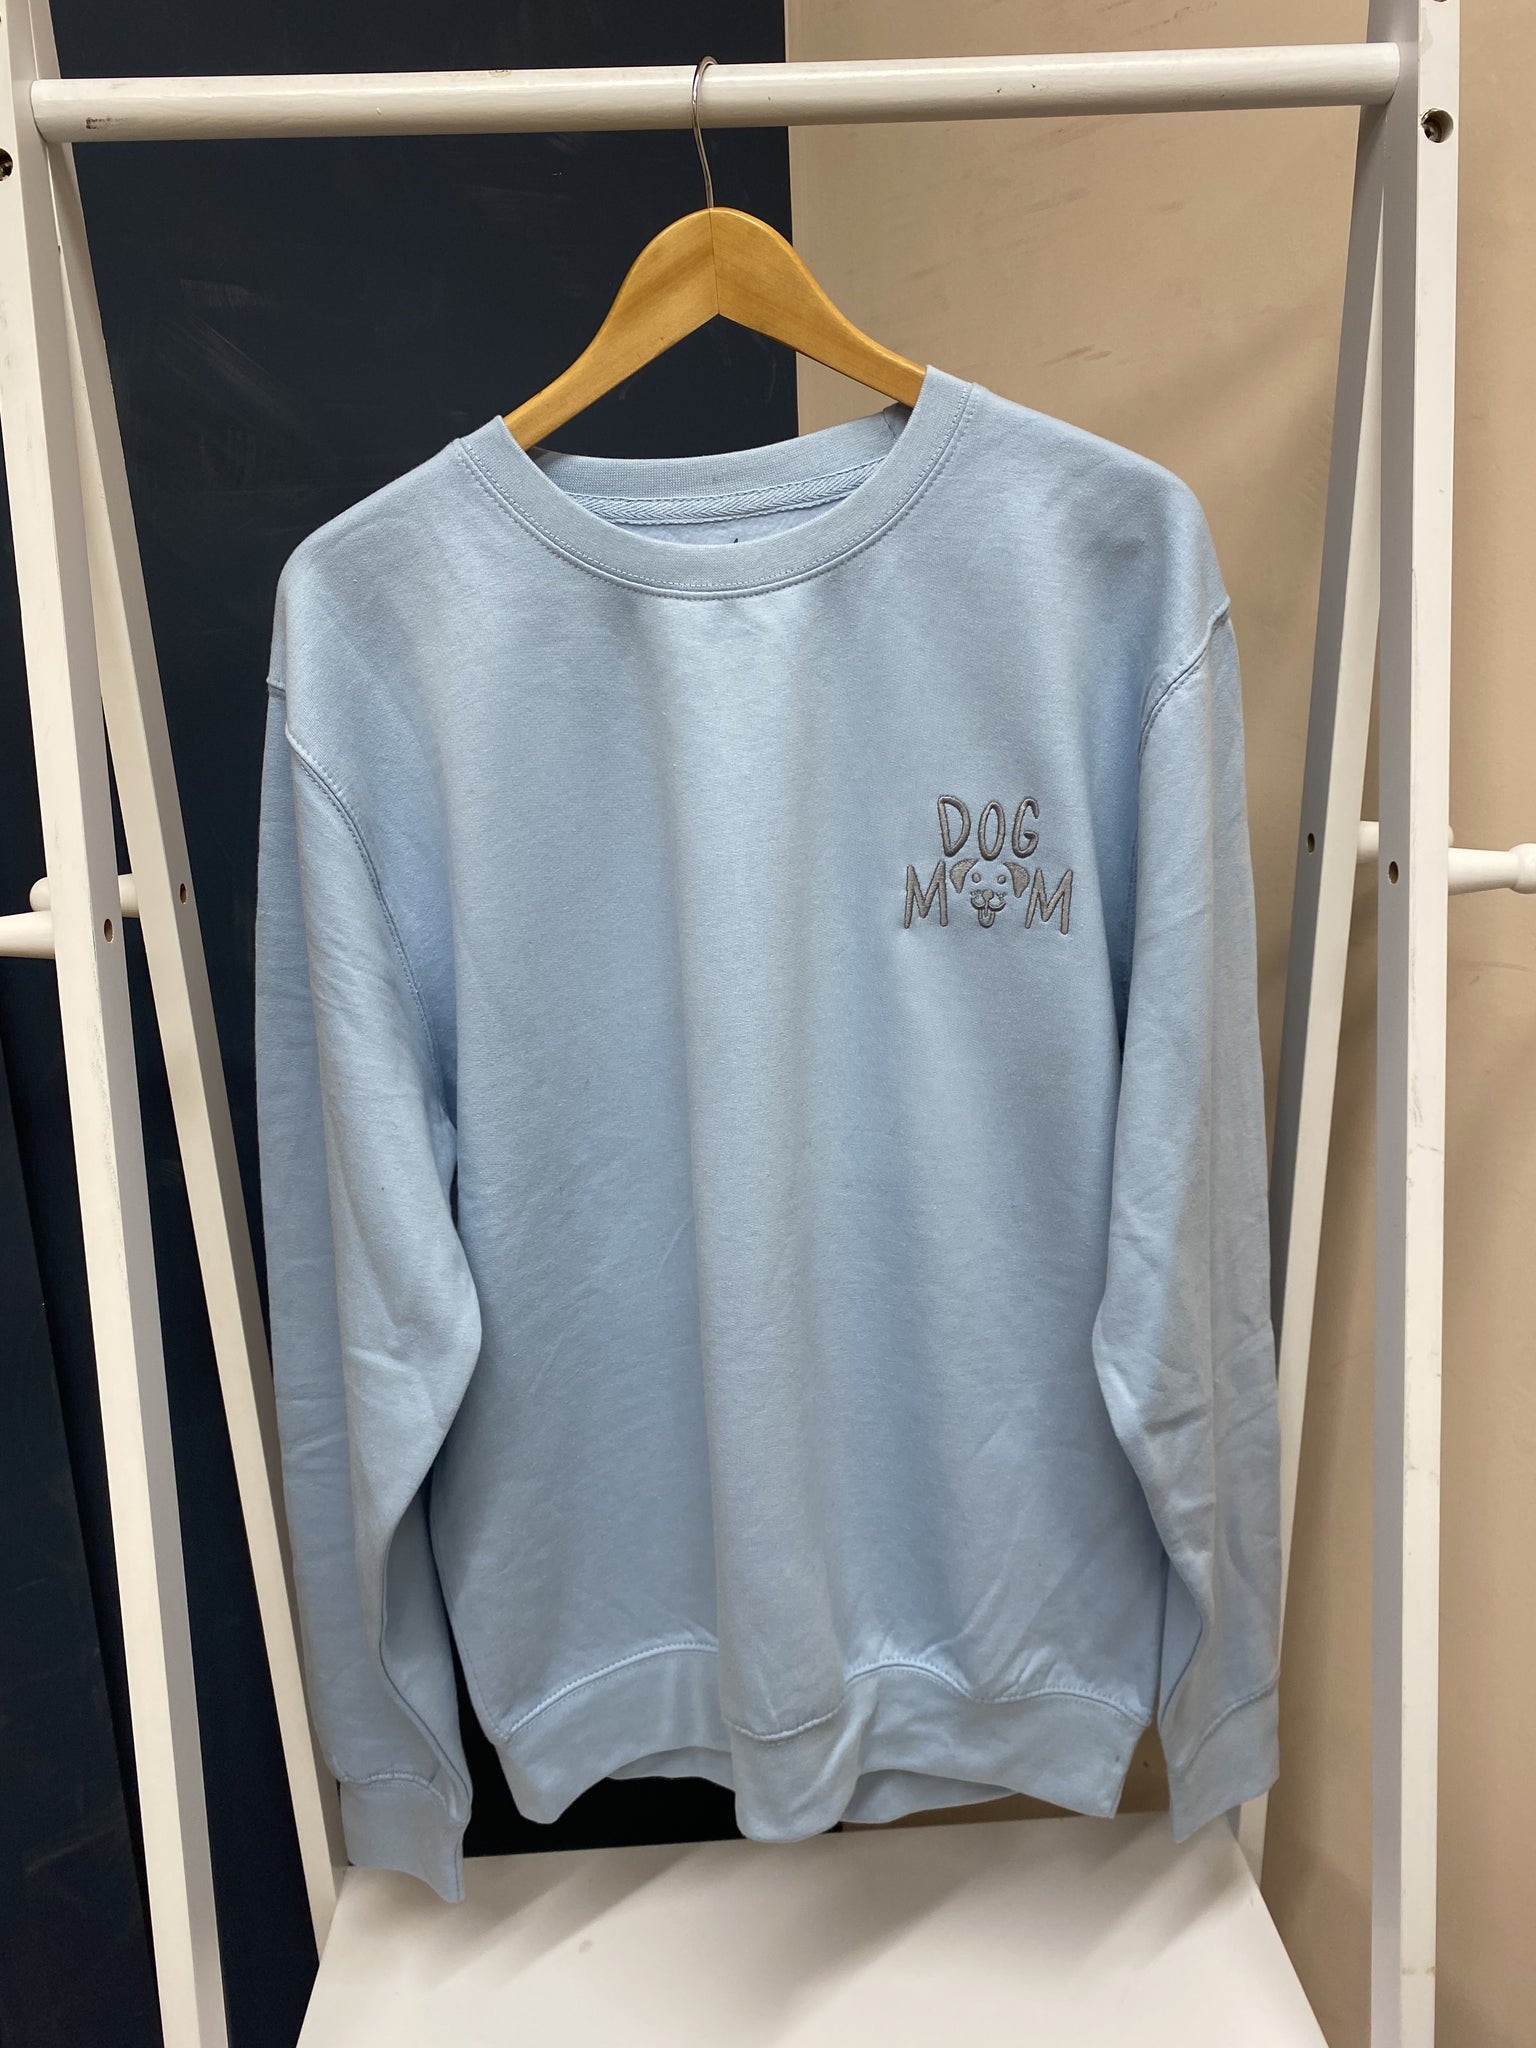 SAMPLE SALE 'Dog Mum' with face Sweater, Baby Blue with Dark Grey Stitching, ALL SIZES